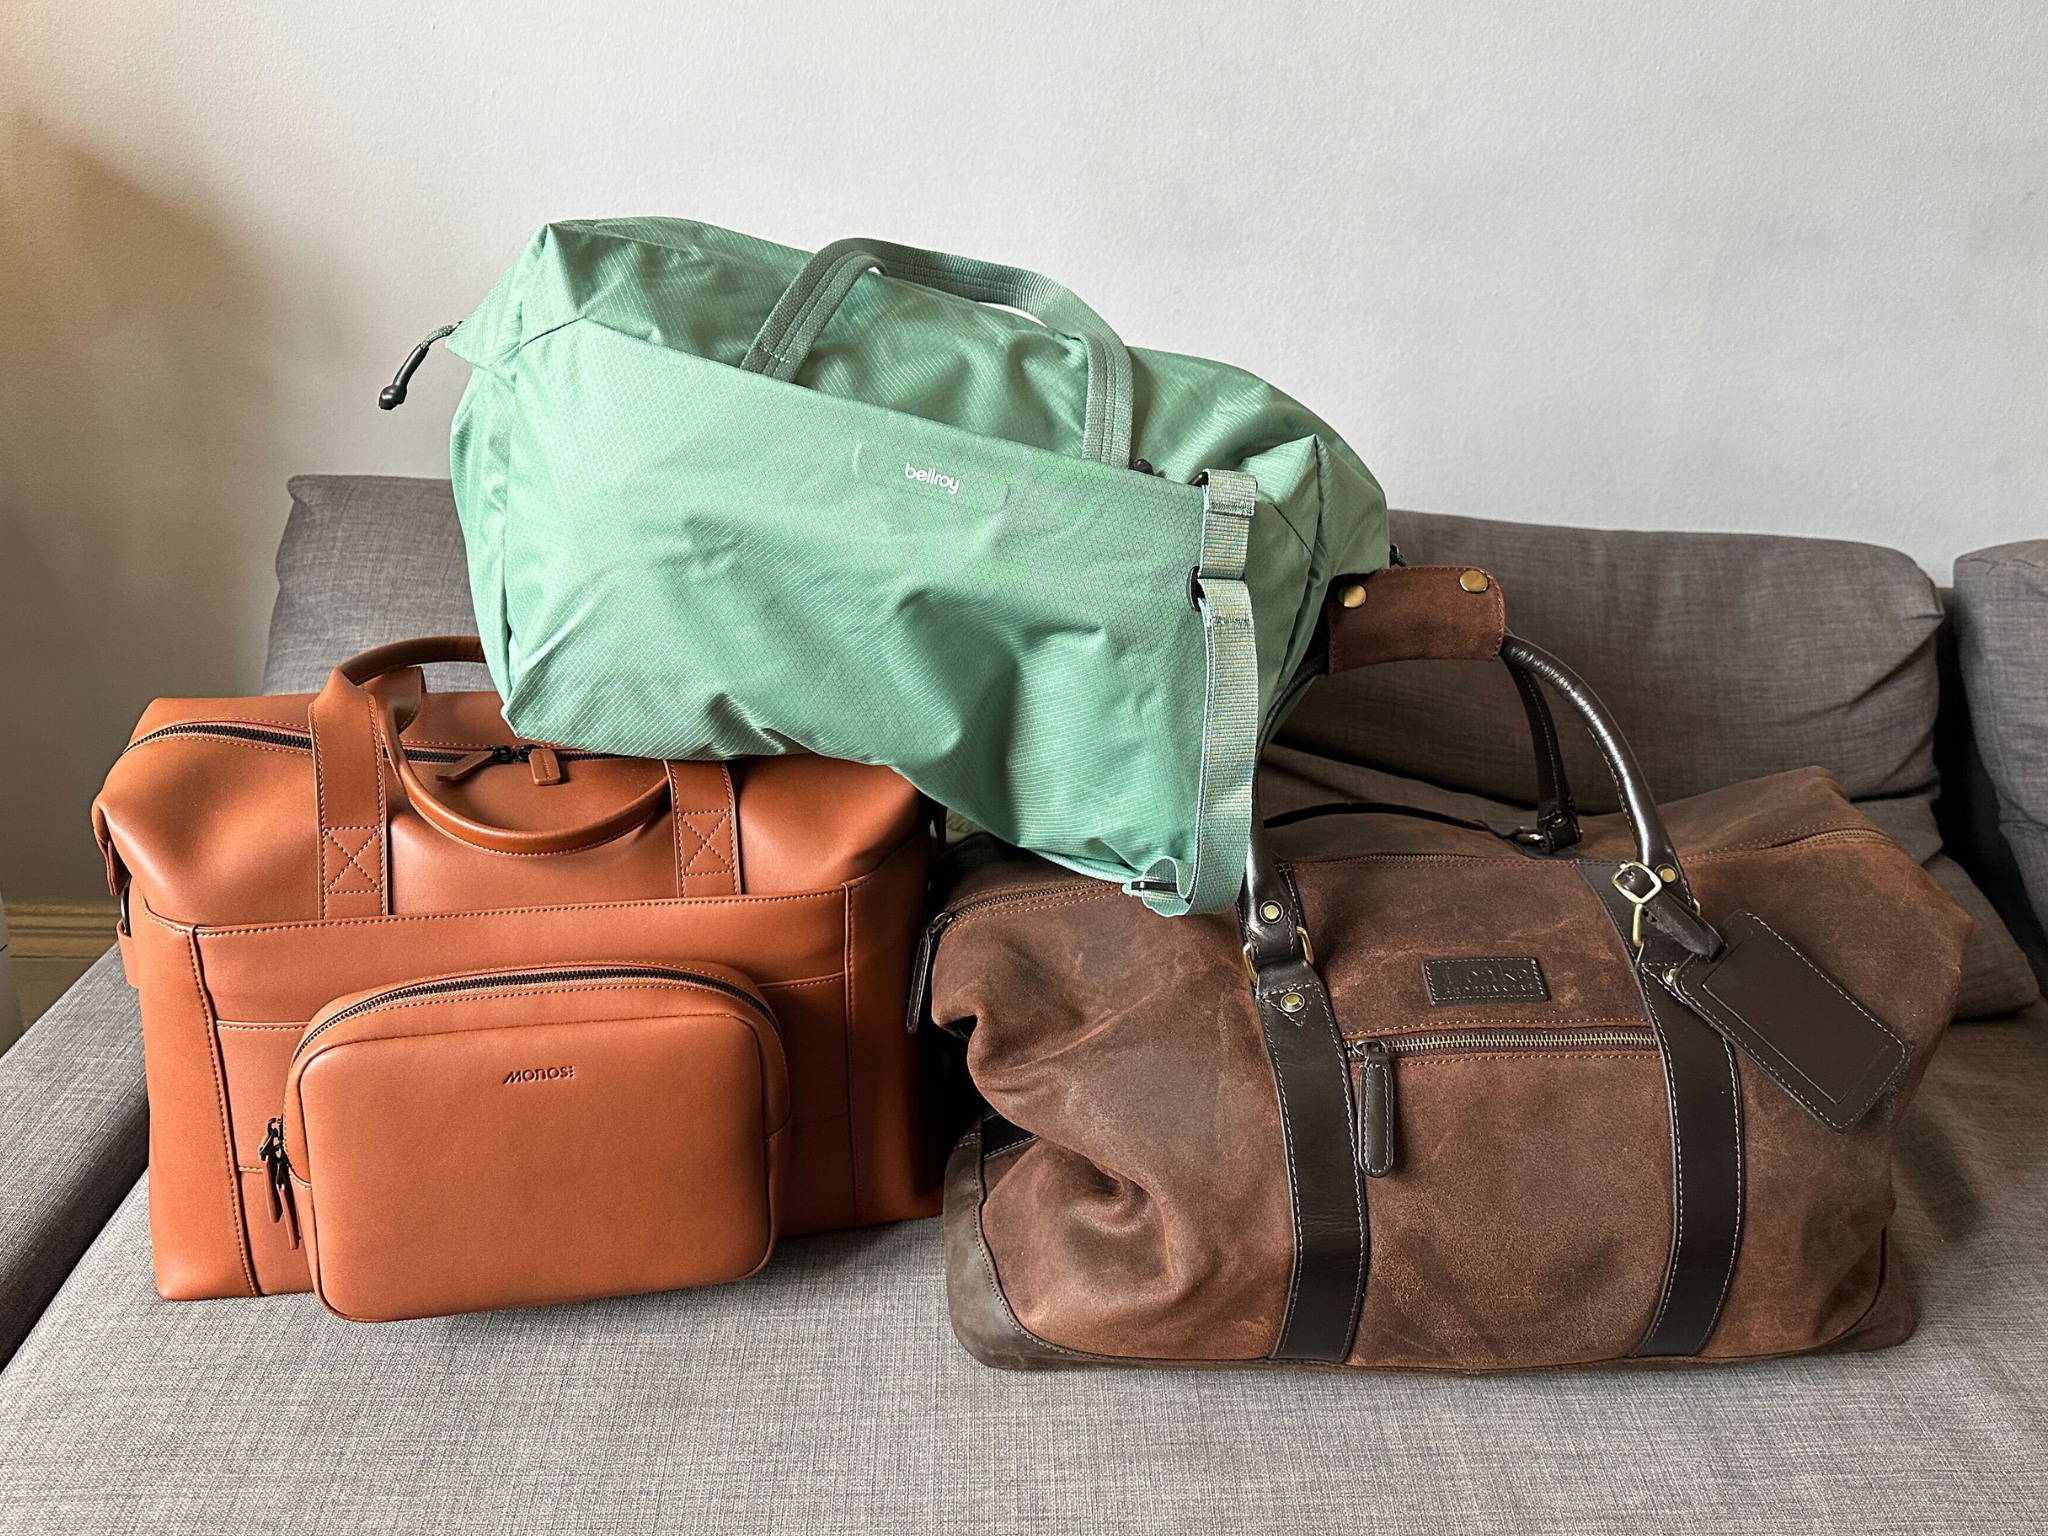 A selection of weekend bags that we tested